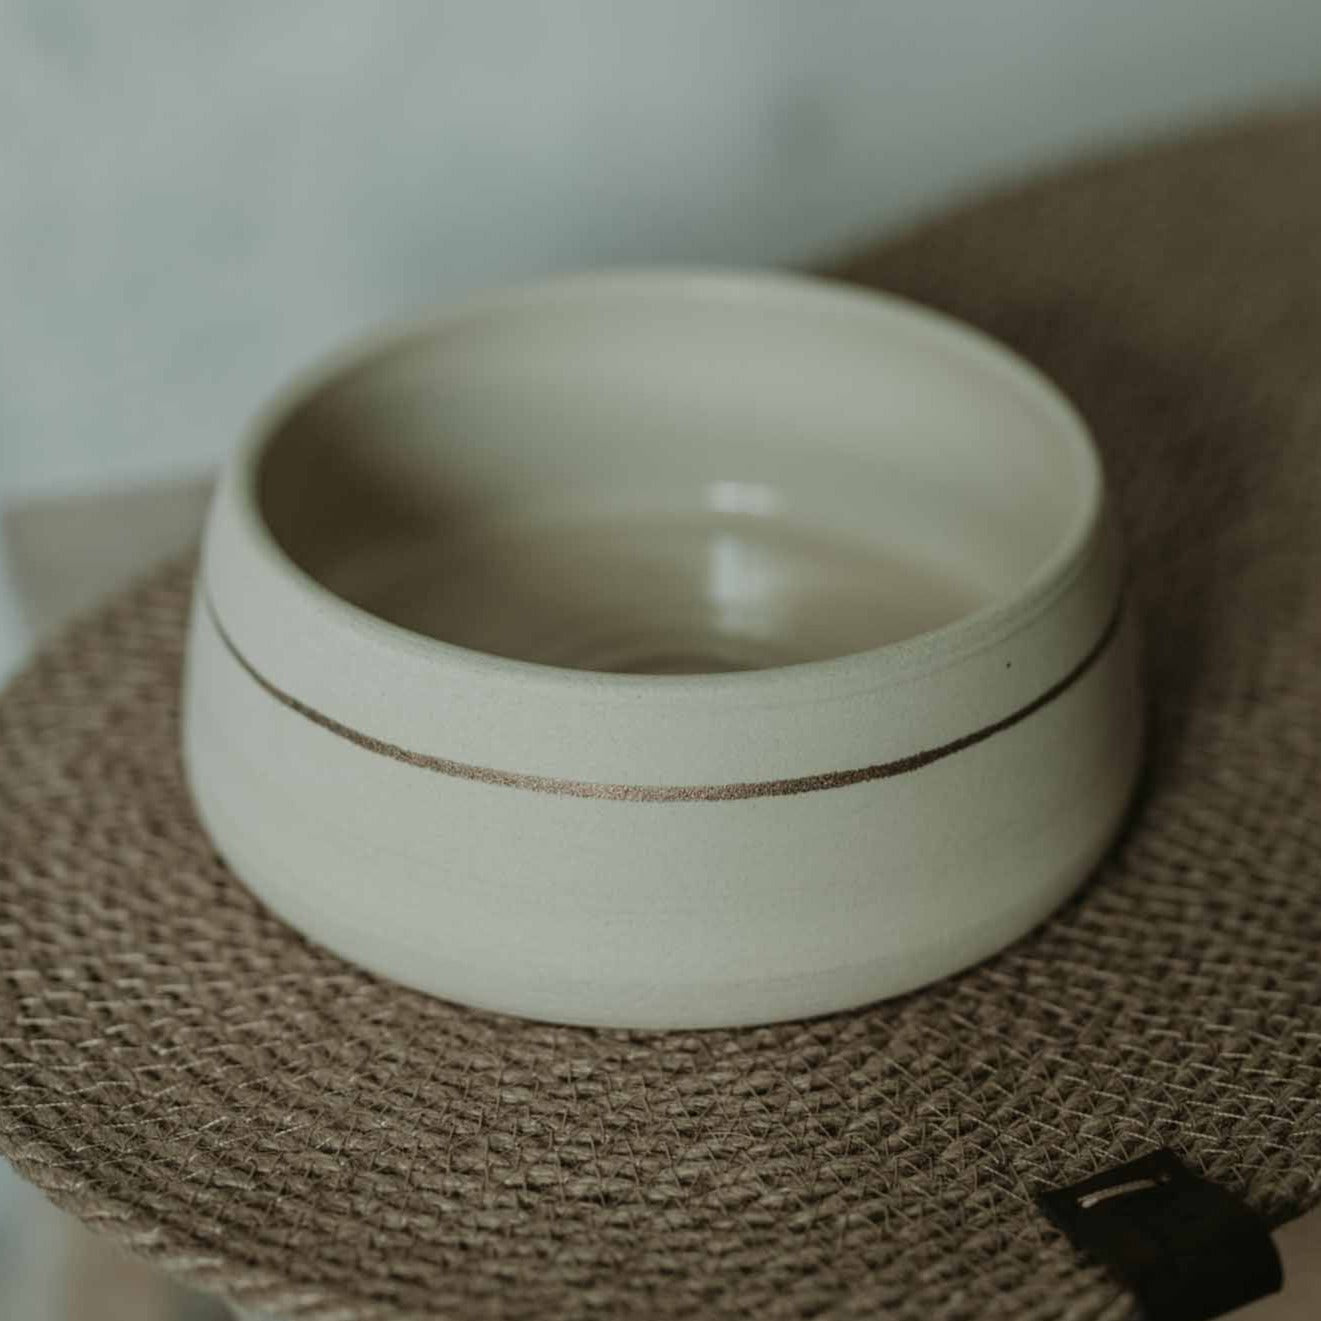 White ceramic dog bowl with golden accent